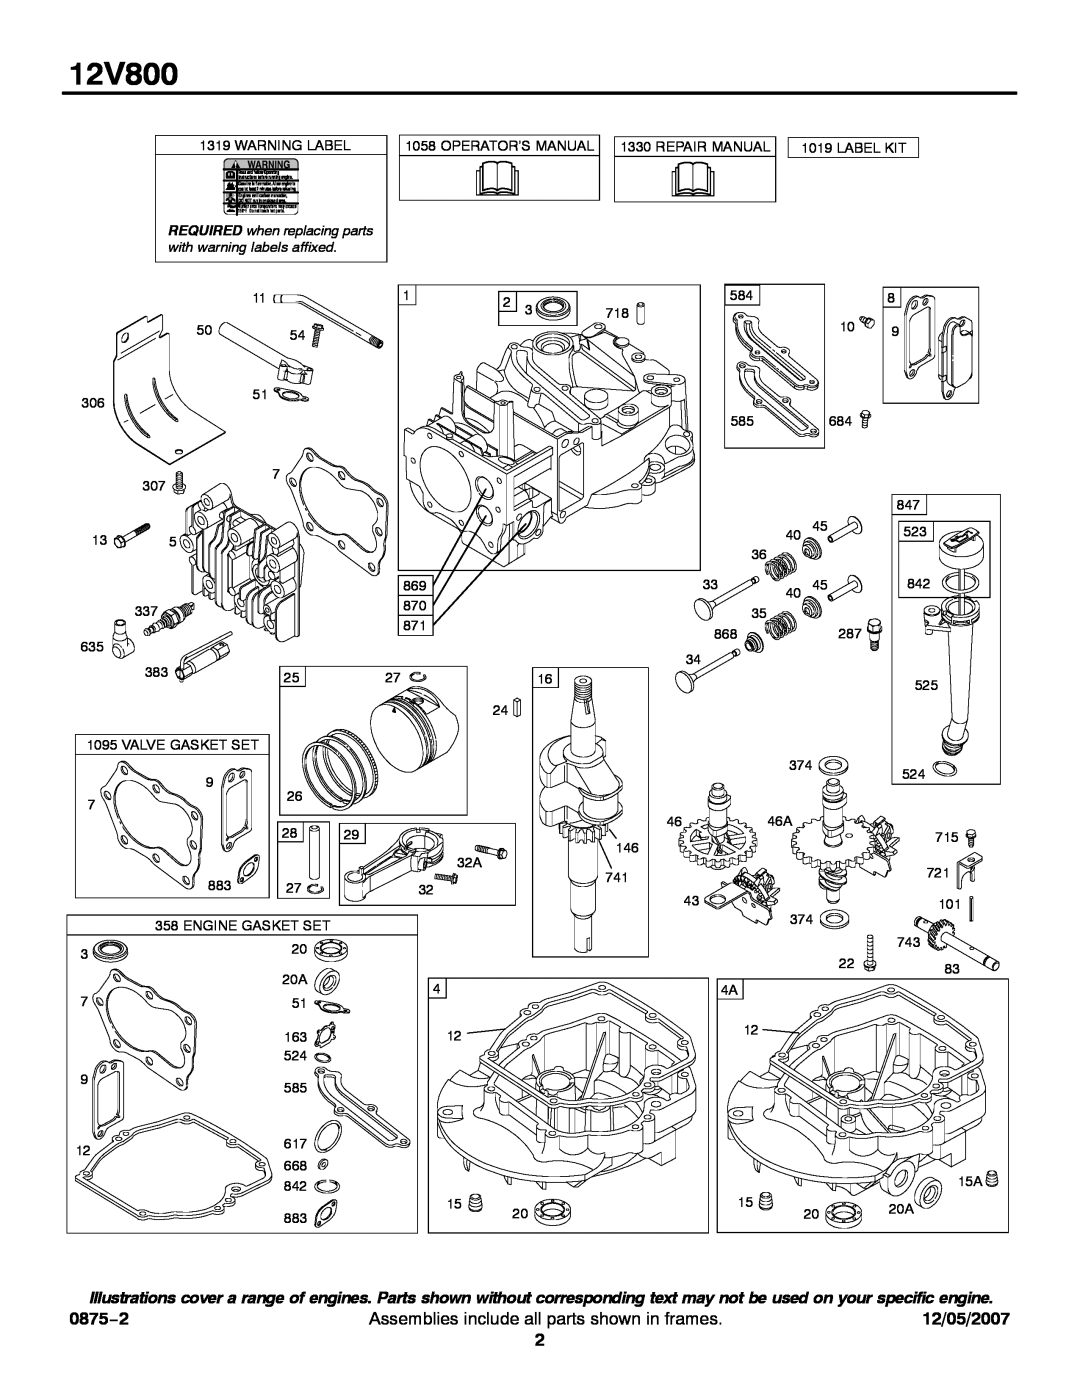 Briggs & Stratton 12V800 service manual 0875−2, Assemblies include all parts shown in frames, 12/05/2007 